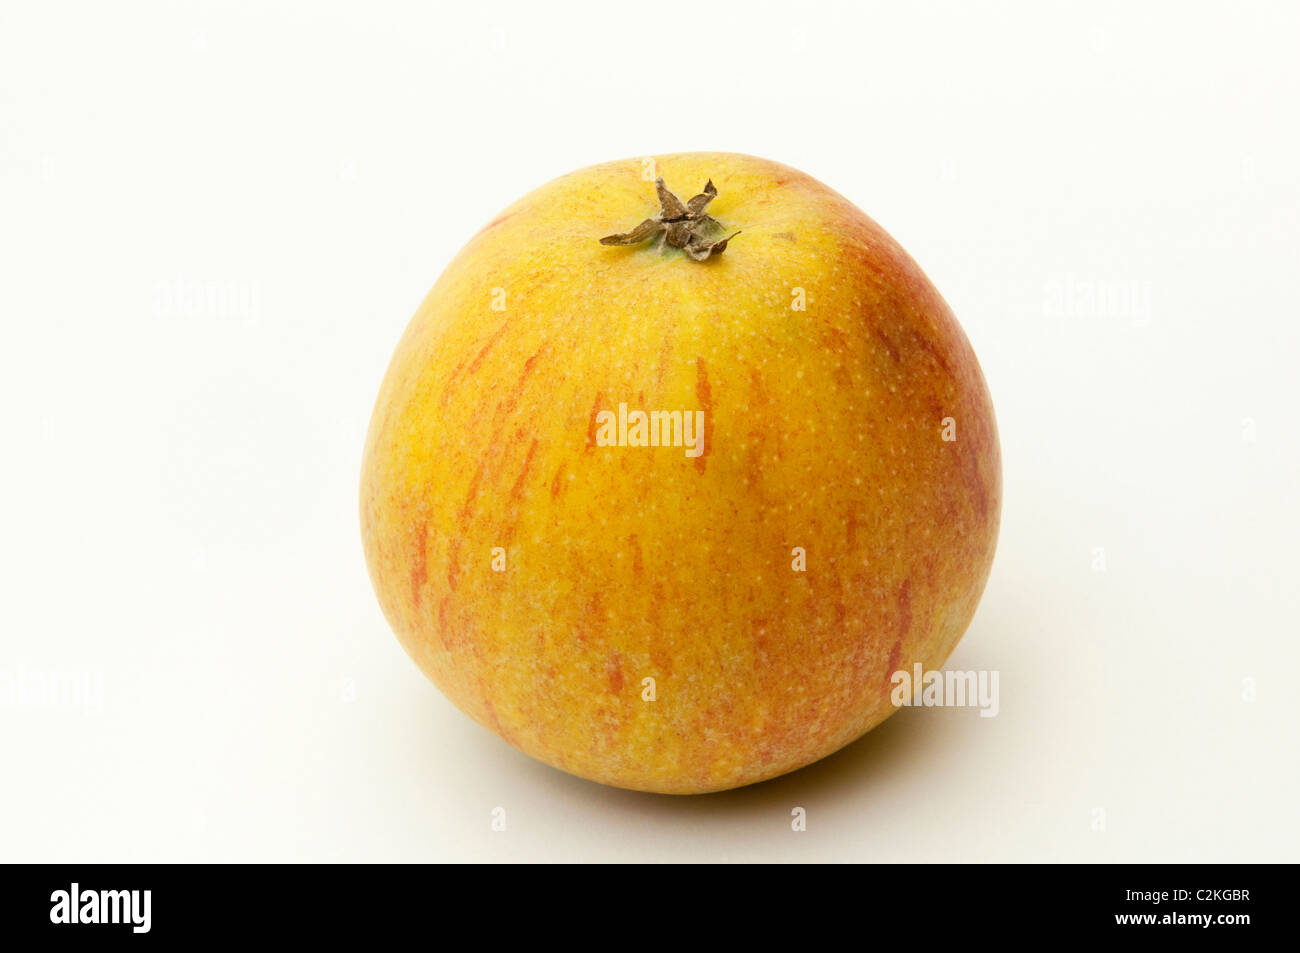 Domestic Apple (Malus domestica), variety: Holsteiner Cox, ripe fruit. Studio picture against a white background. Stock Photo